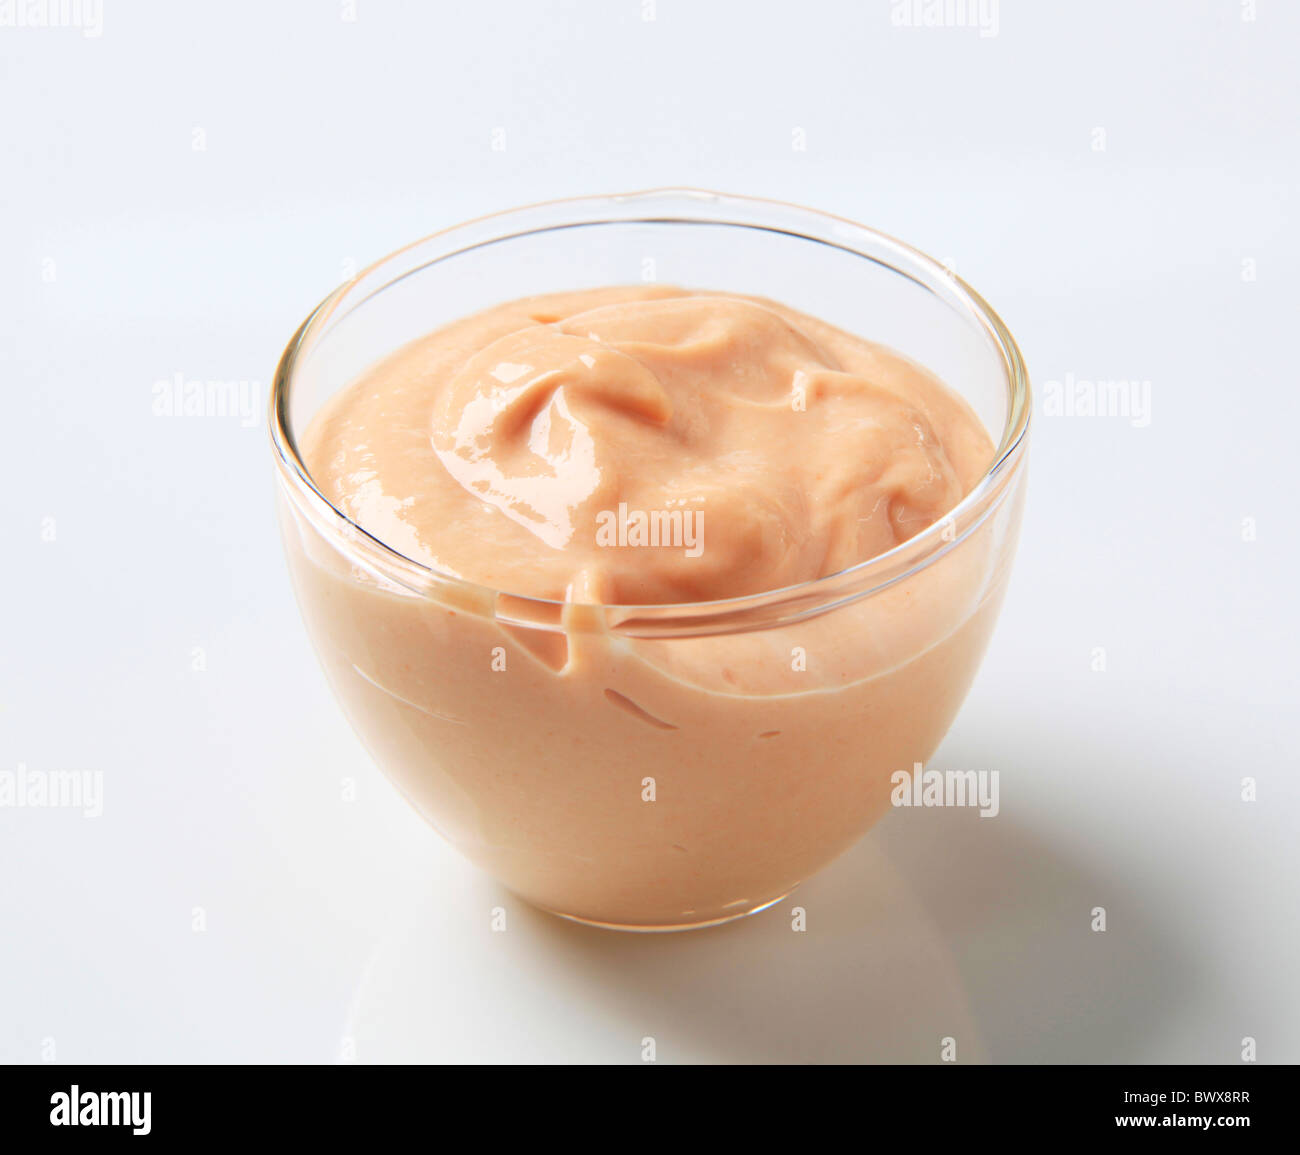 Bowl of dipping sauce Stock Photo